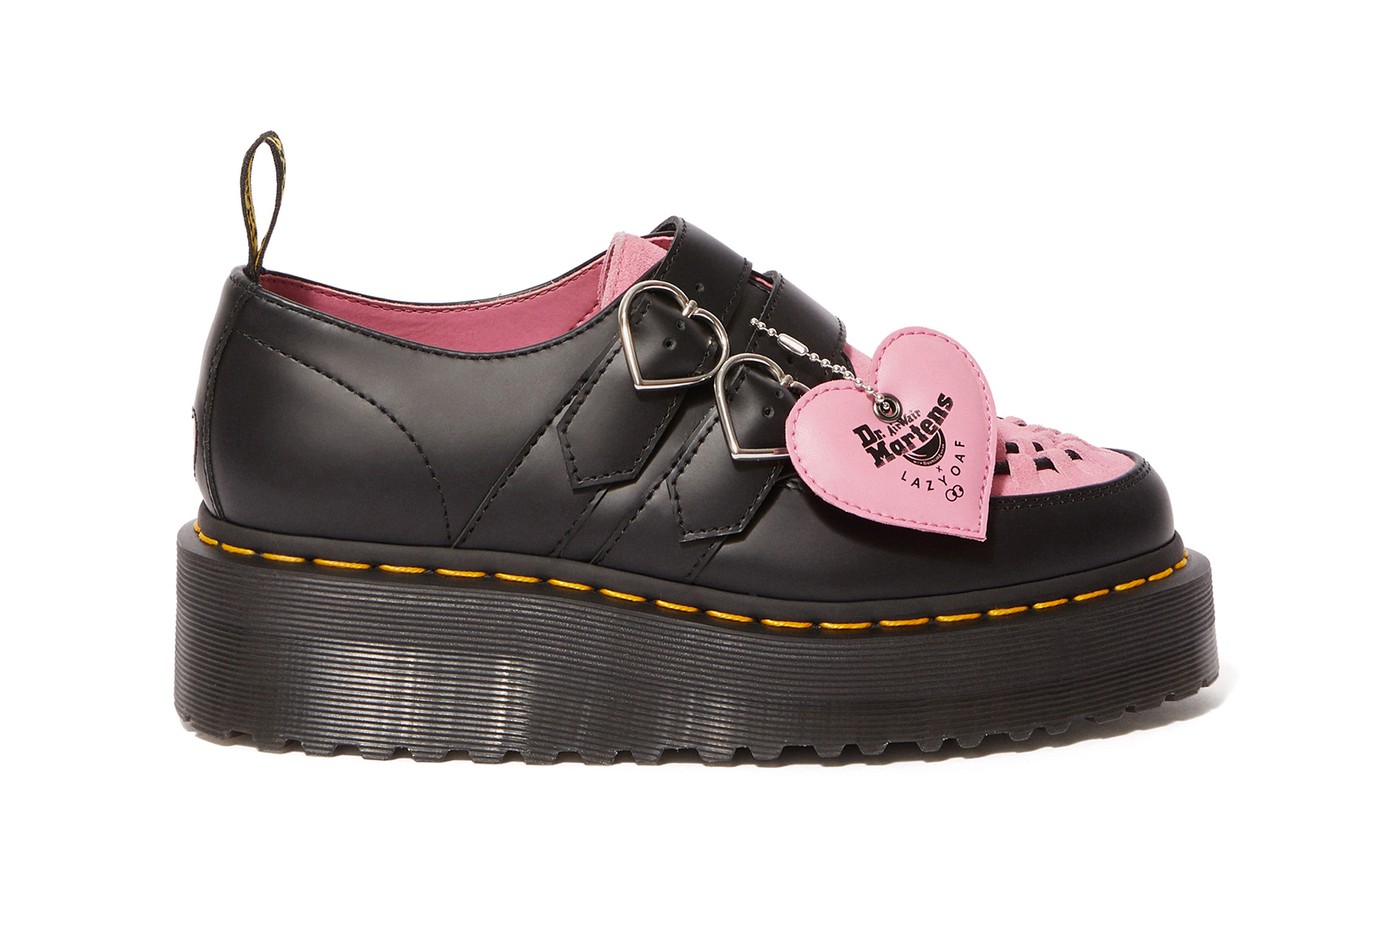 Lazy Oaf x Dr.  Martens - The rebellious character of the girls